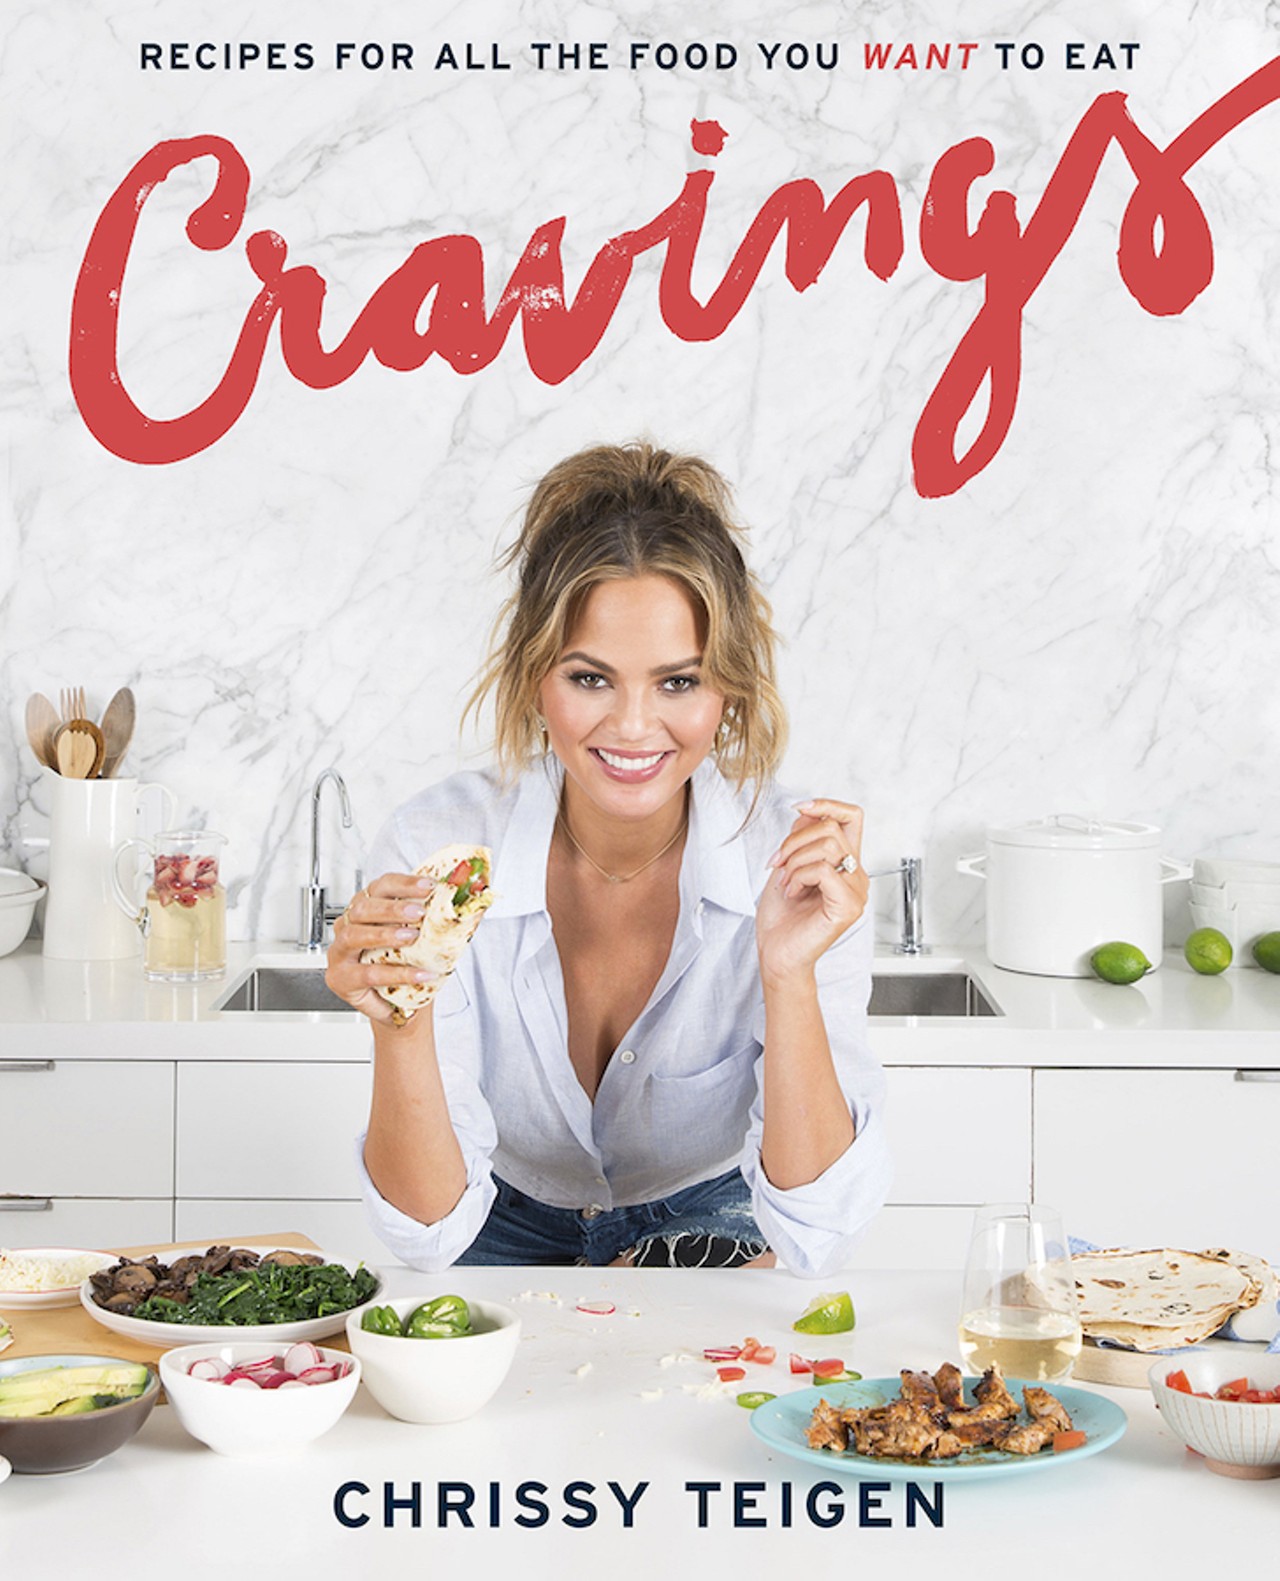 Cravings: Recipes for All the Food You Want to Eat, by Chrissy Teigen (Random House, 240 pages)
OK, OK, hear me out. I know: Chrissy Teigen, of Sports Illustrated and Twitter fame? But this is truly the perfect book to turn to for potlucks, family gatherings and office parties. Is it basic? Totally. Is it incredibly useful? Absolutely. Are there some tasty bites to be had? You better believe it.